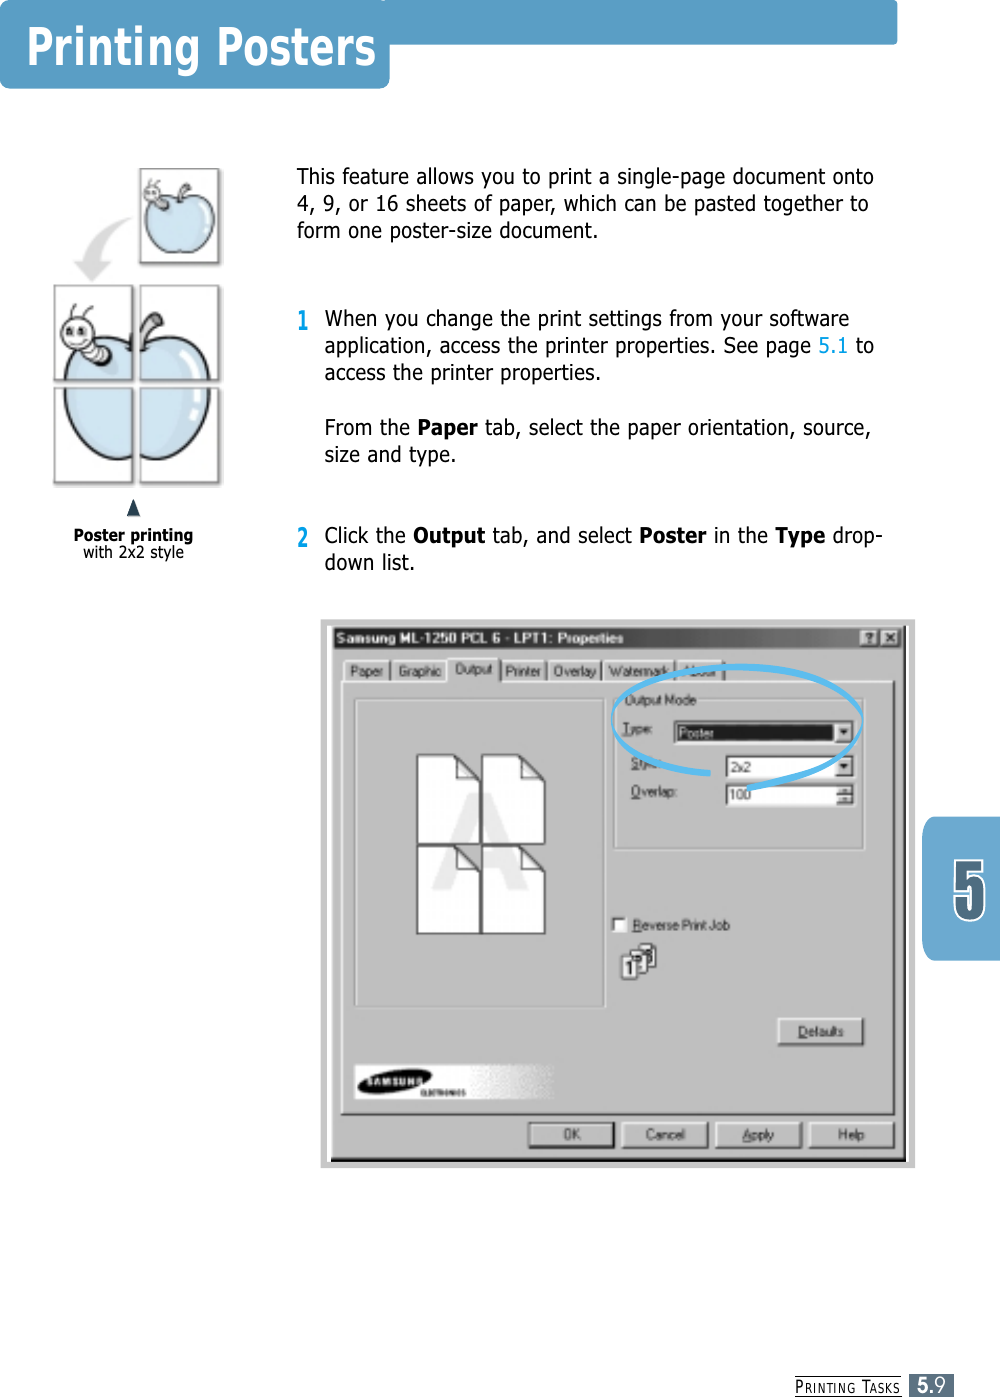 PRINTING TASKS5.9Printing PostersThis feature allows you to print a single-page document onto4, 9, or 16 sheets of paper, which can be pasted together toform one poster-size document.1When you change the print settings from your softwareapplication, access the printer properties. See page 5.1 toaccess the printer properties.From the Paper tab, select the paper orientation, source,size and type.2Click the Output tab, and select Poster in the Type drop-down list.Poster printingwith 2x2 style